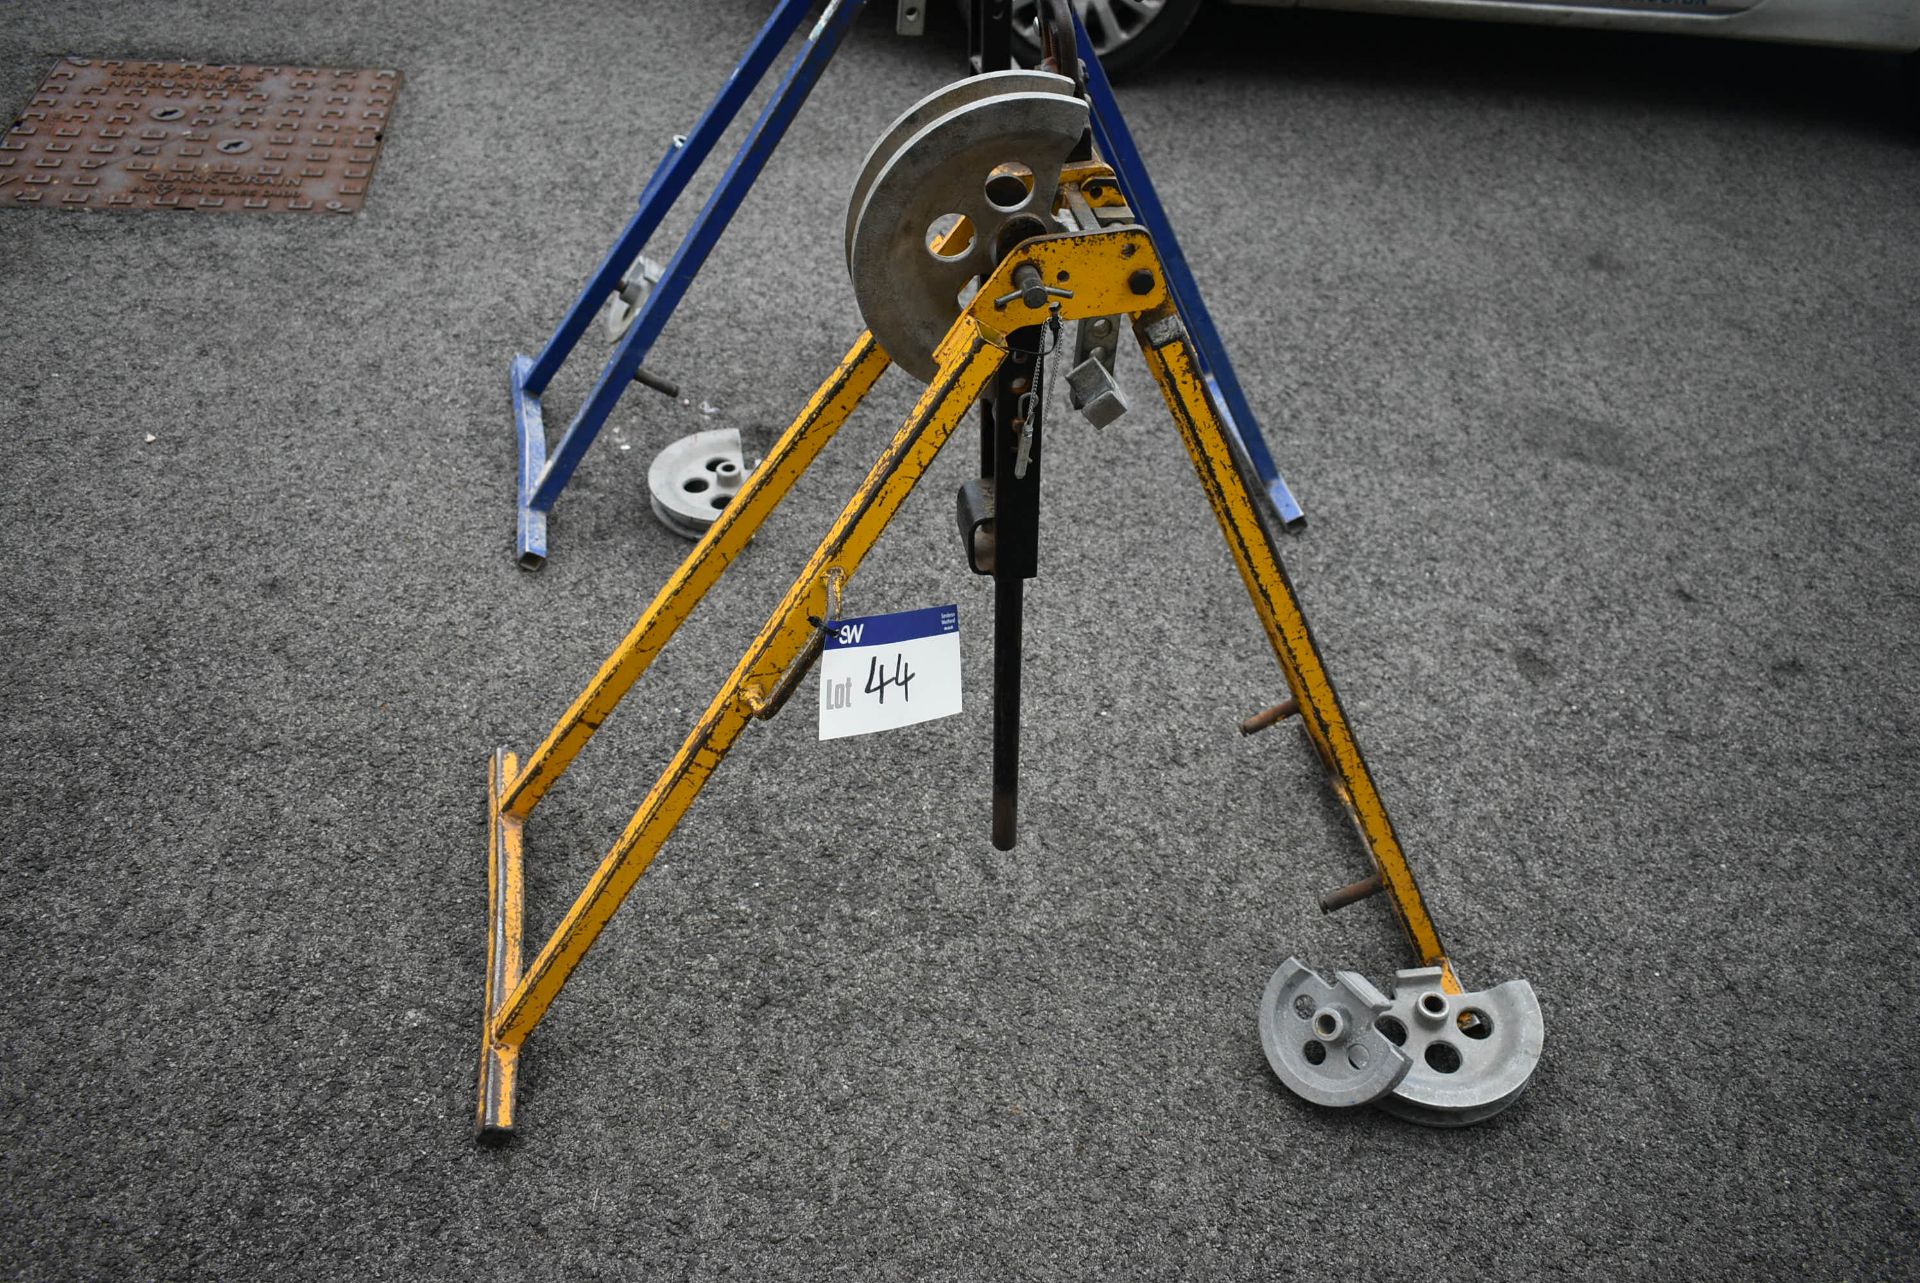 Pipe Bending Stand & Vice, with former as fitted and two spare formersPlease read the following